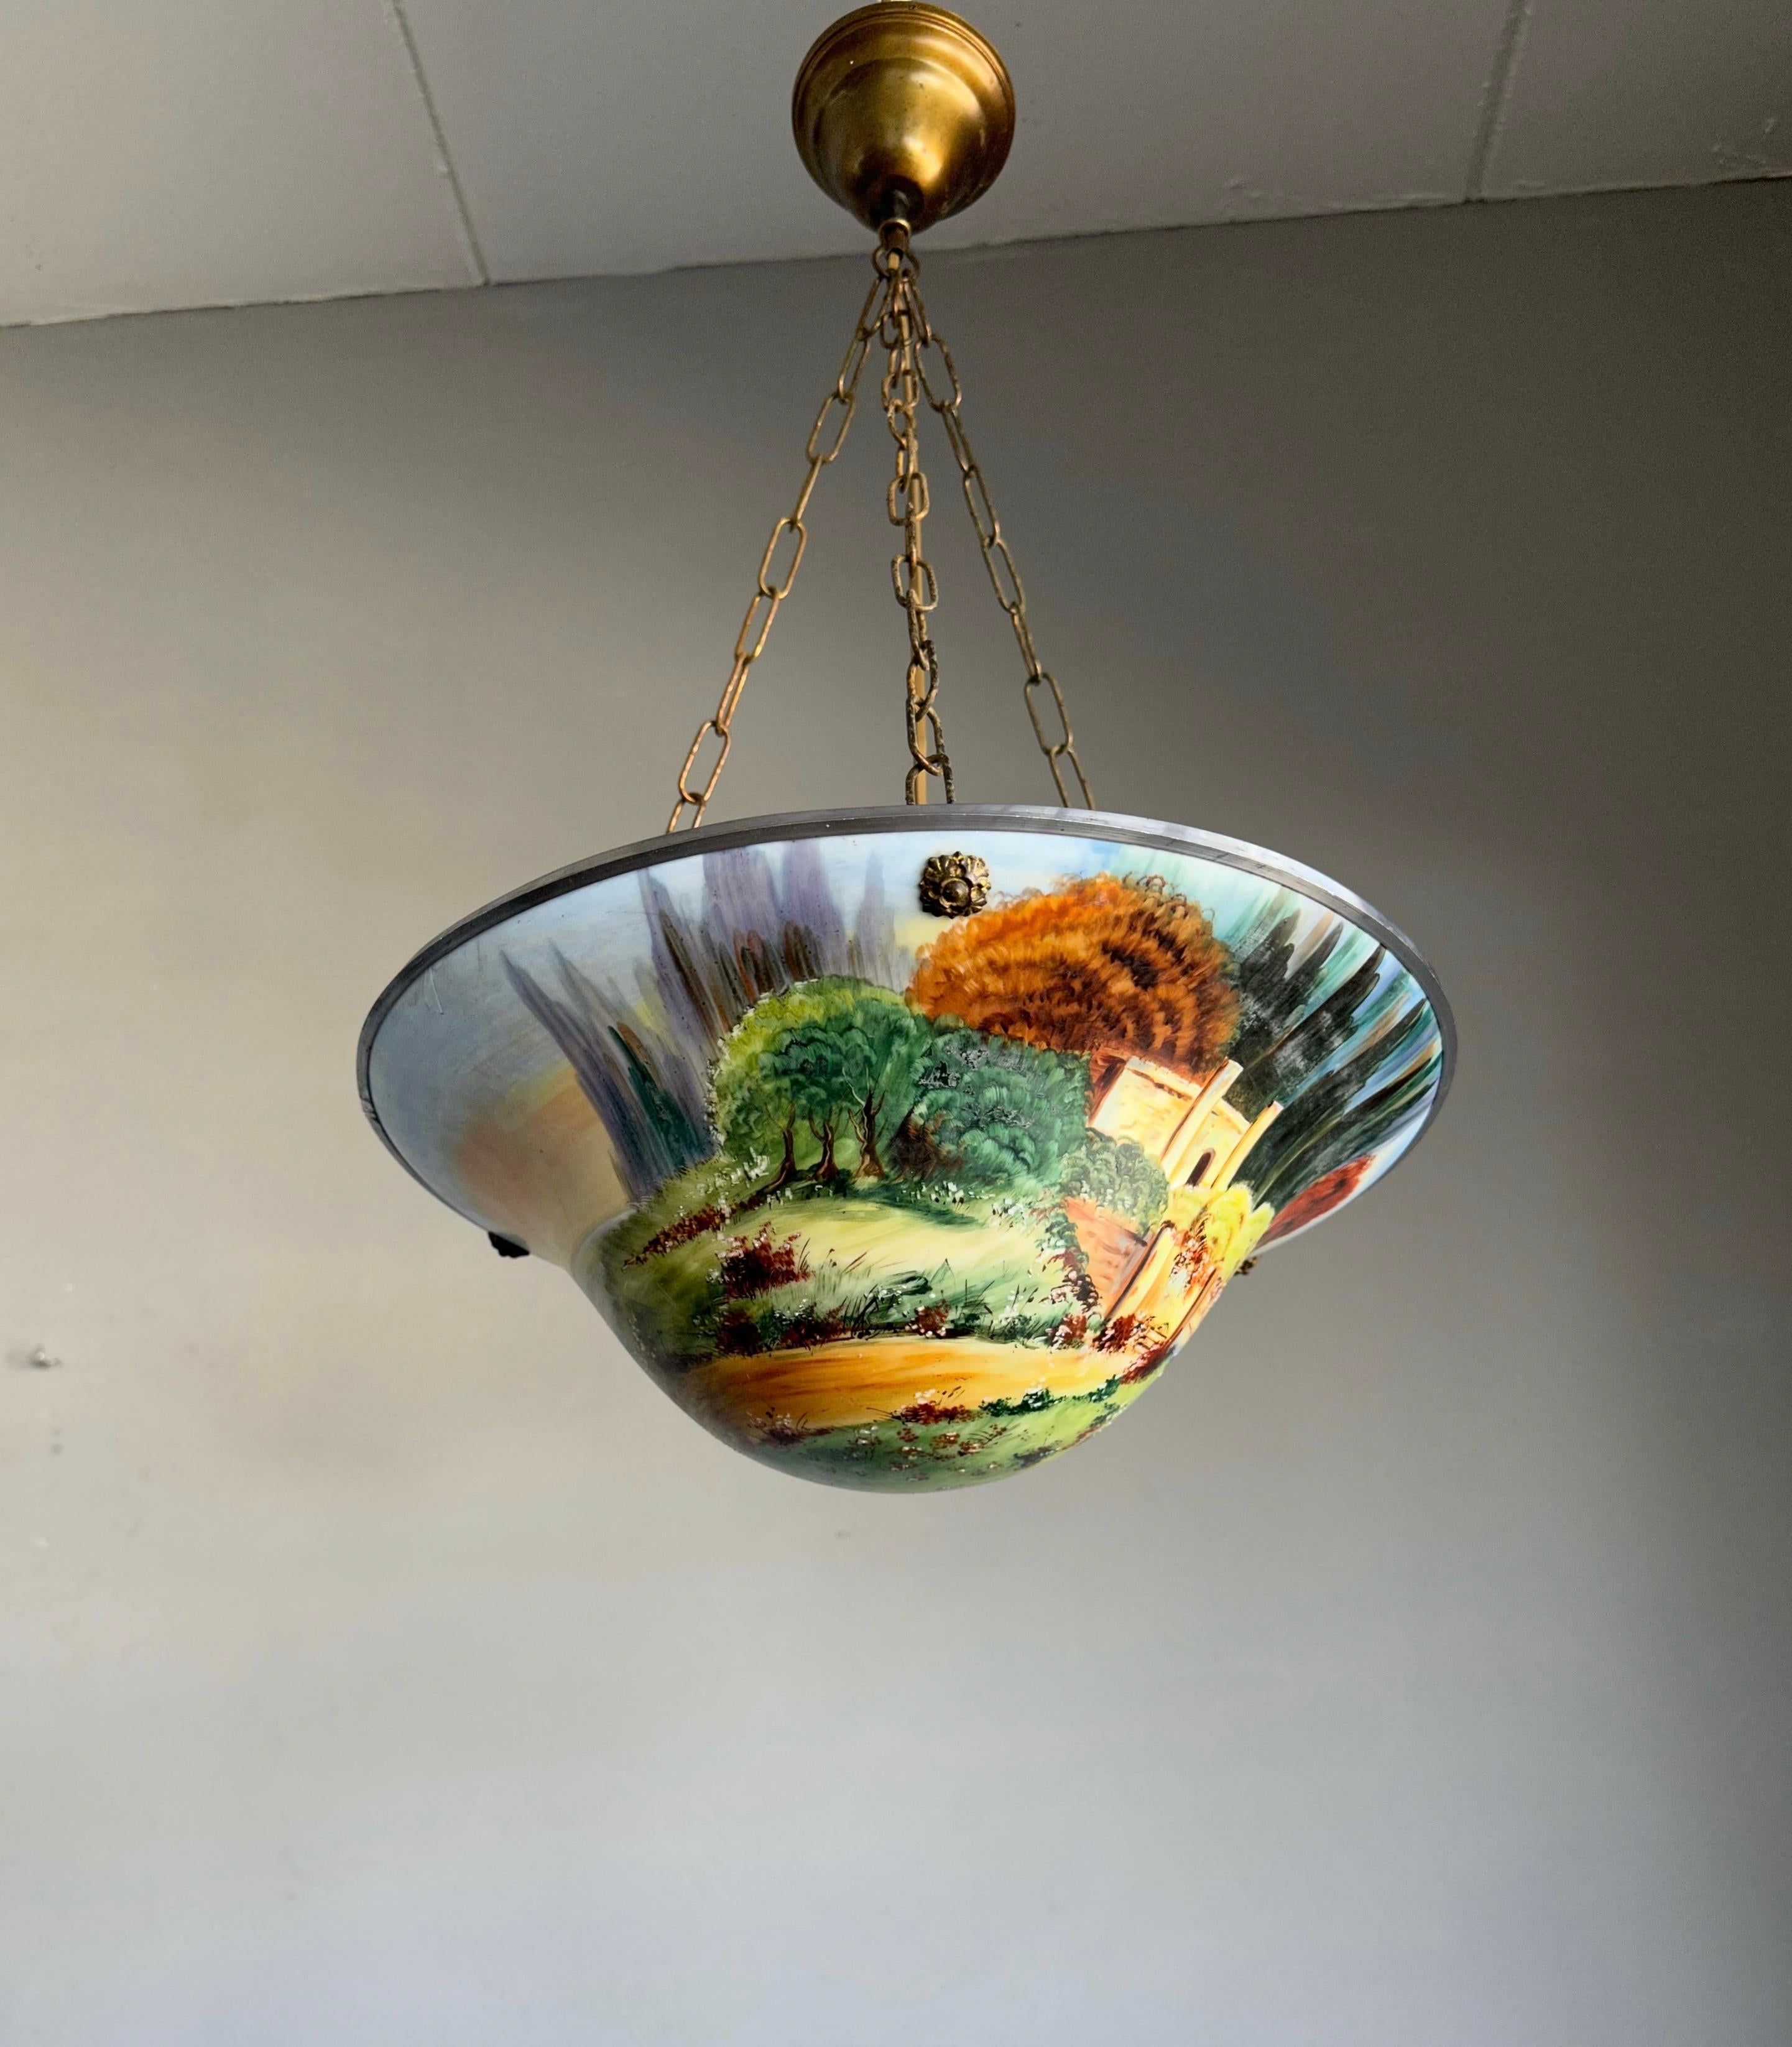 Incredibly beautiful light fixture with a landscape decor of amazing natural colors.

This rare, beautifully designed and very finely decorated pendant is destined to grace someone's entrance, landing or bedroom soon, because if you are looking